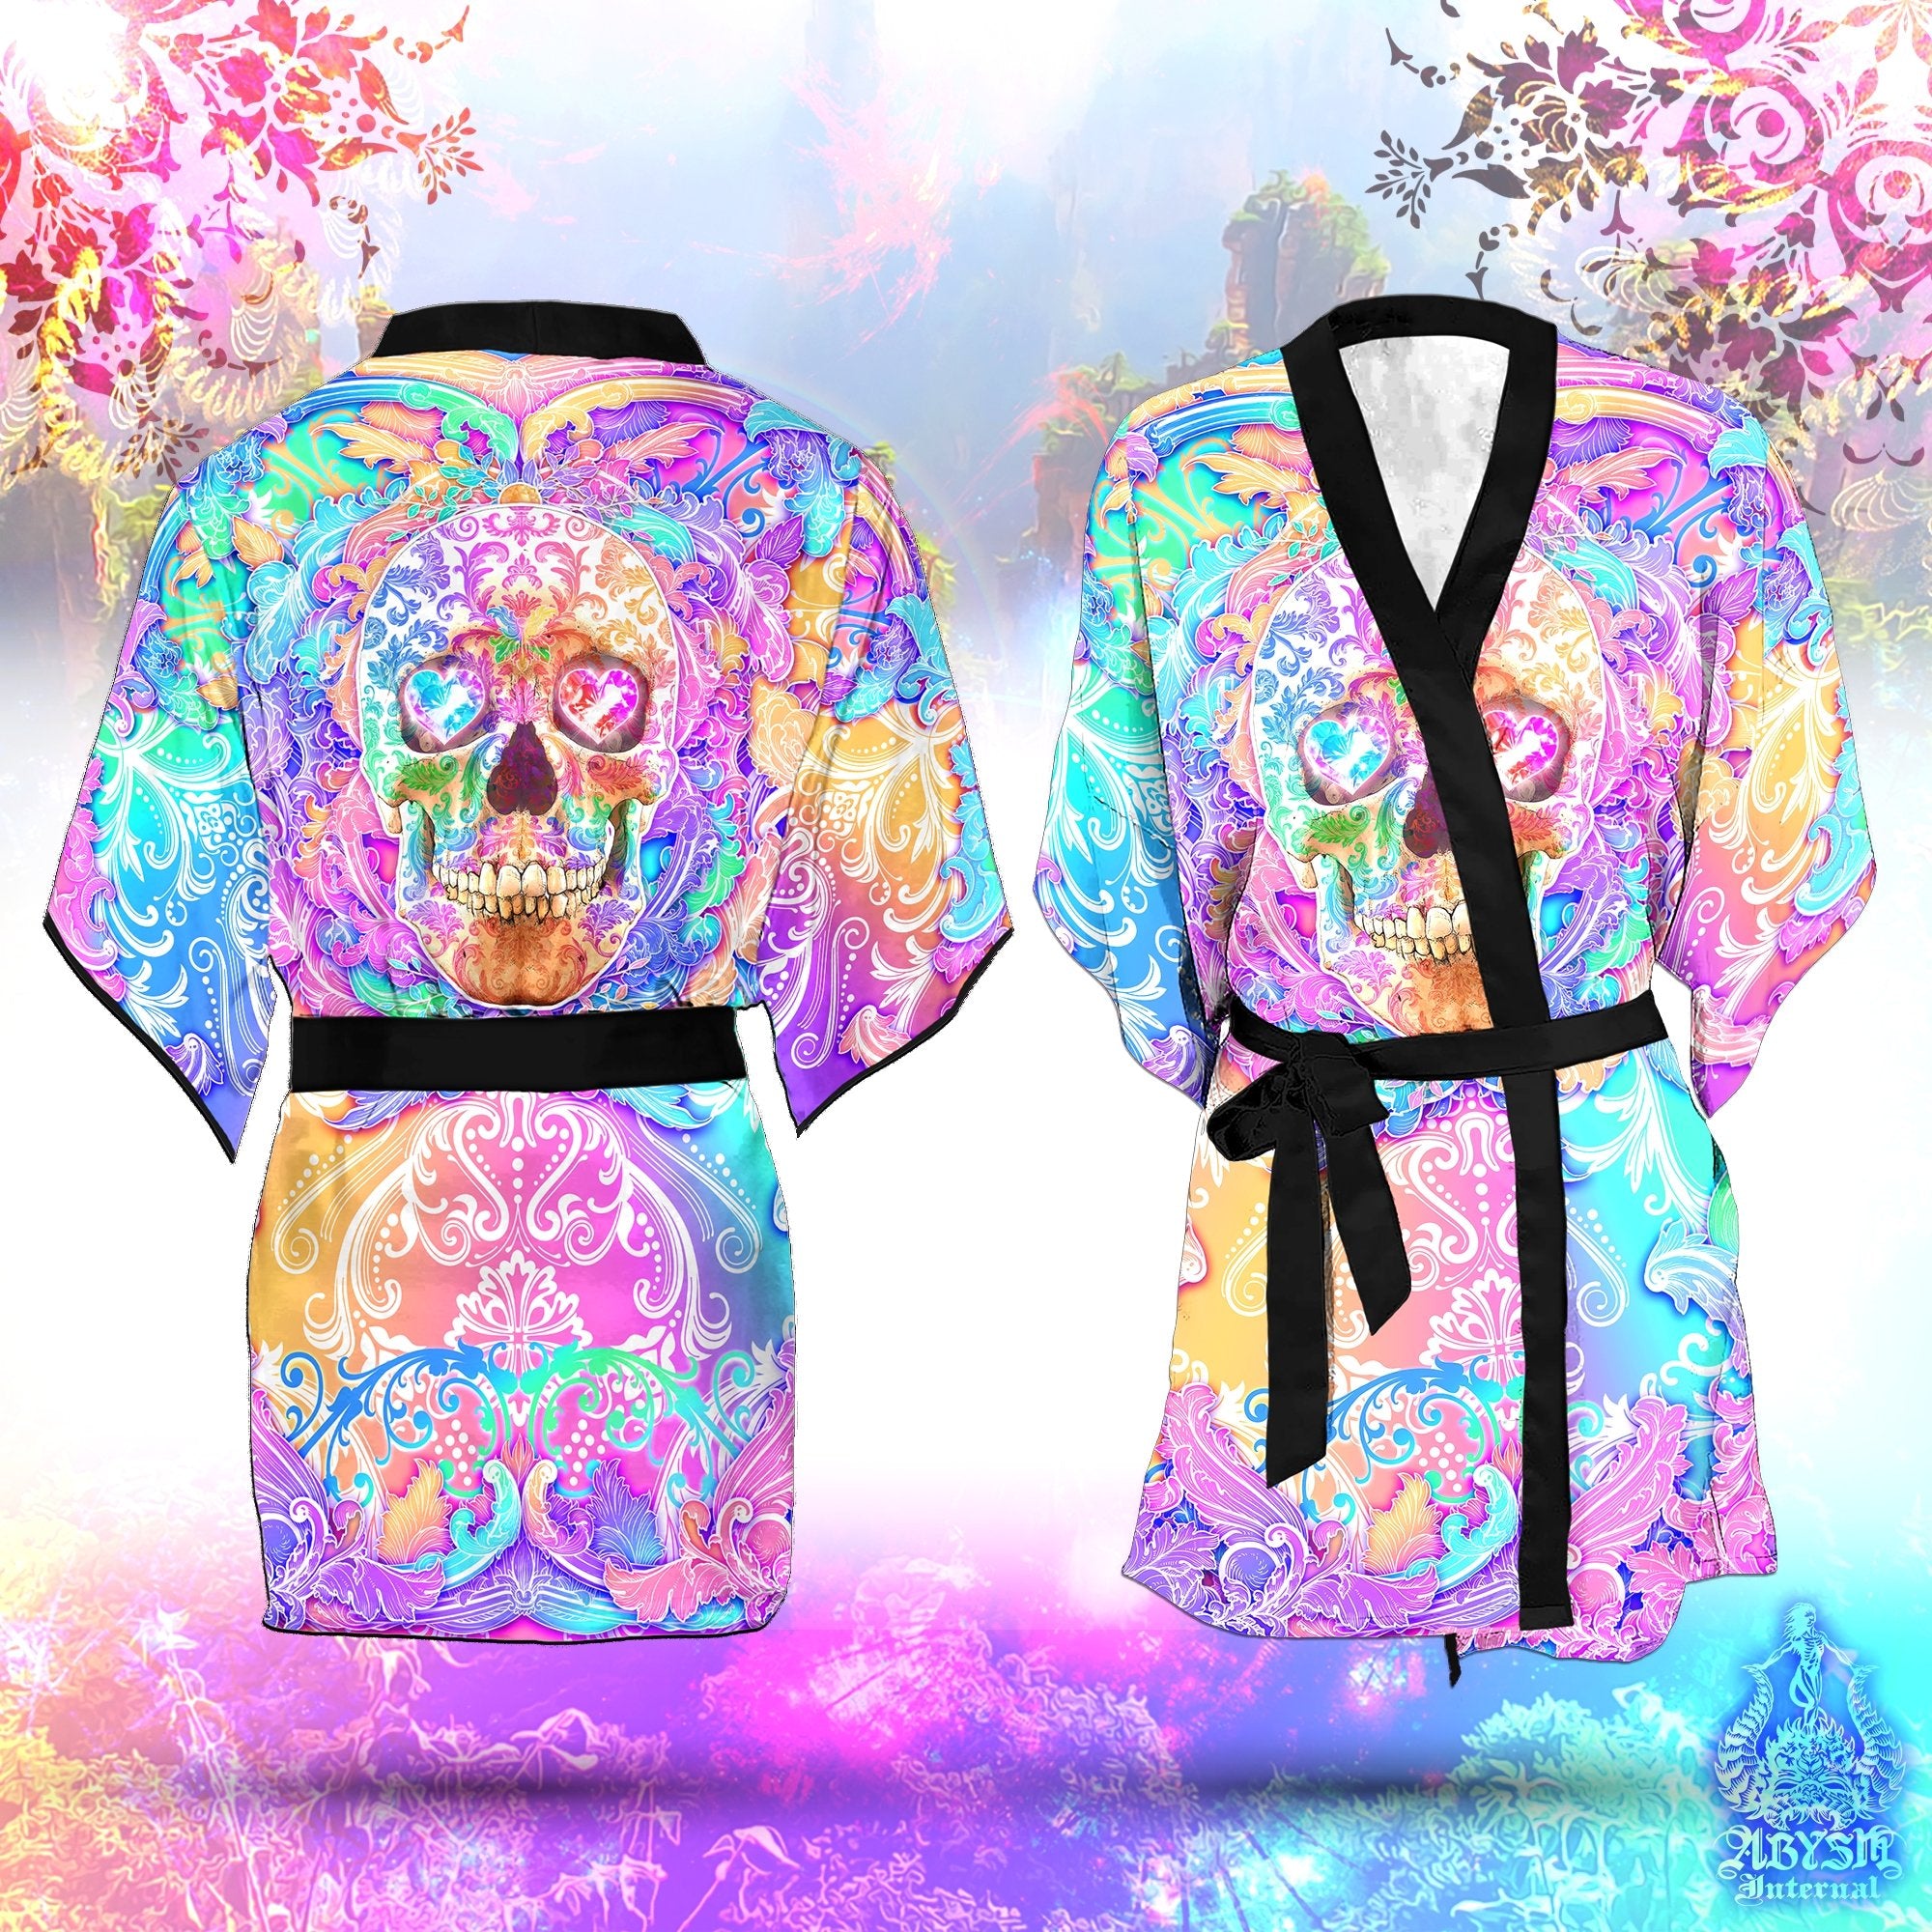 Skull Cover Up, Beach Rave Outfit, Party Kimono, Boho Summer Festival Robe, Aesthetic Indie and Alternative Clothing, Unisex - Holographic Pastel - Abysm Internal